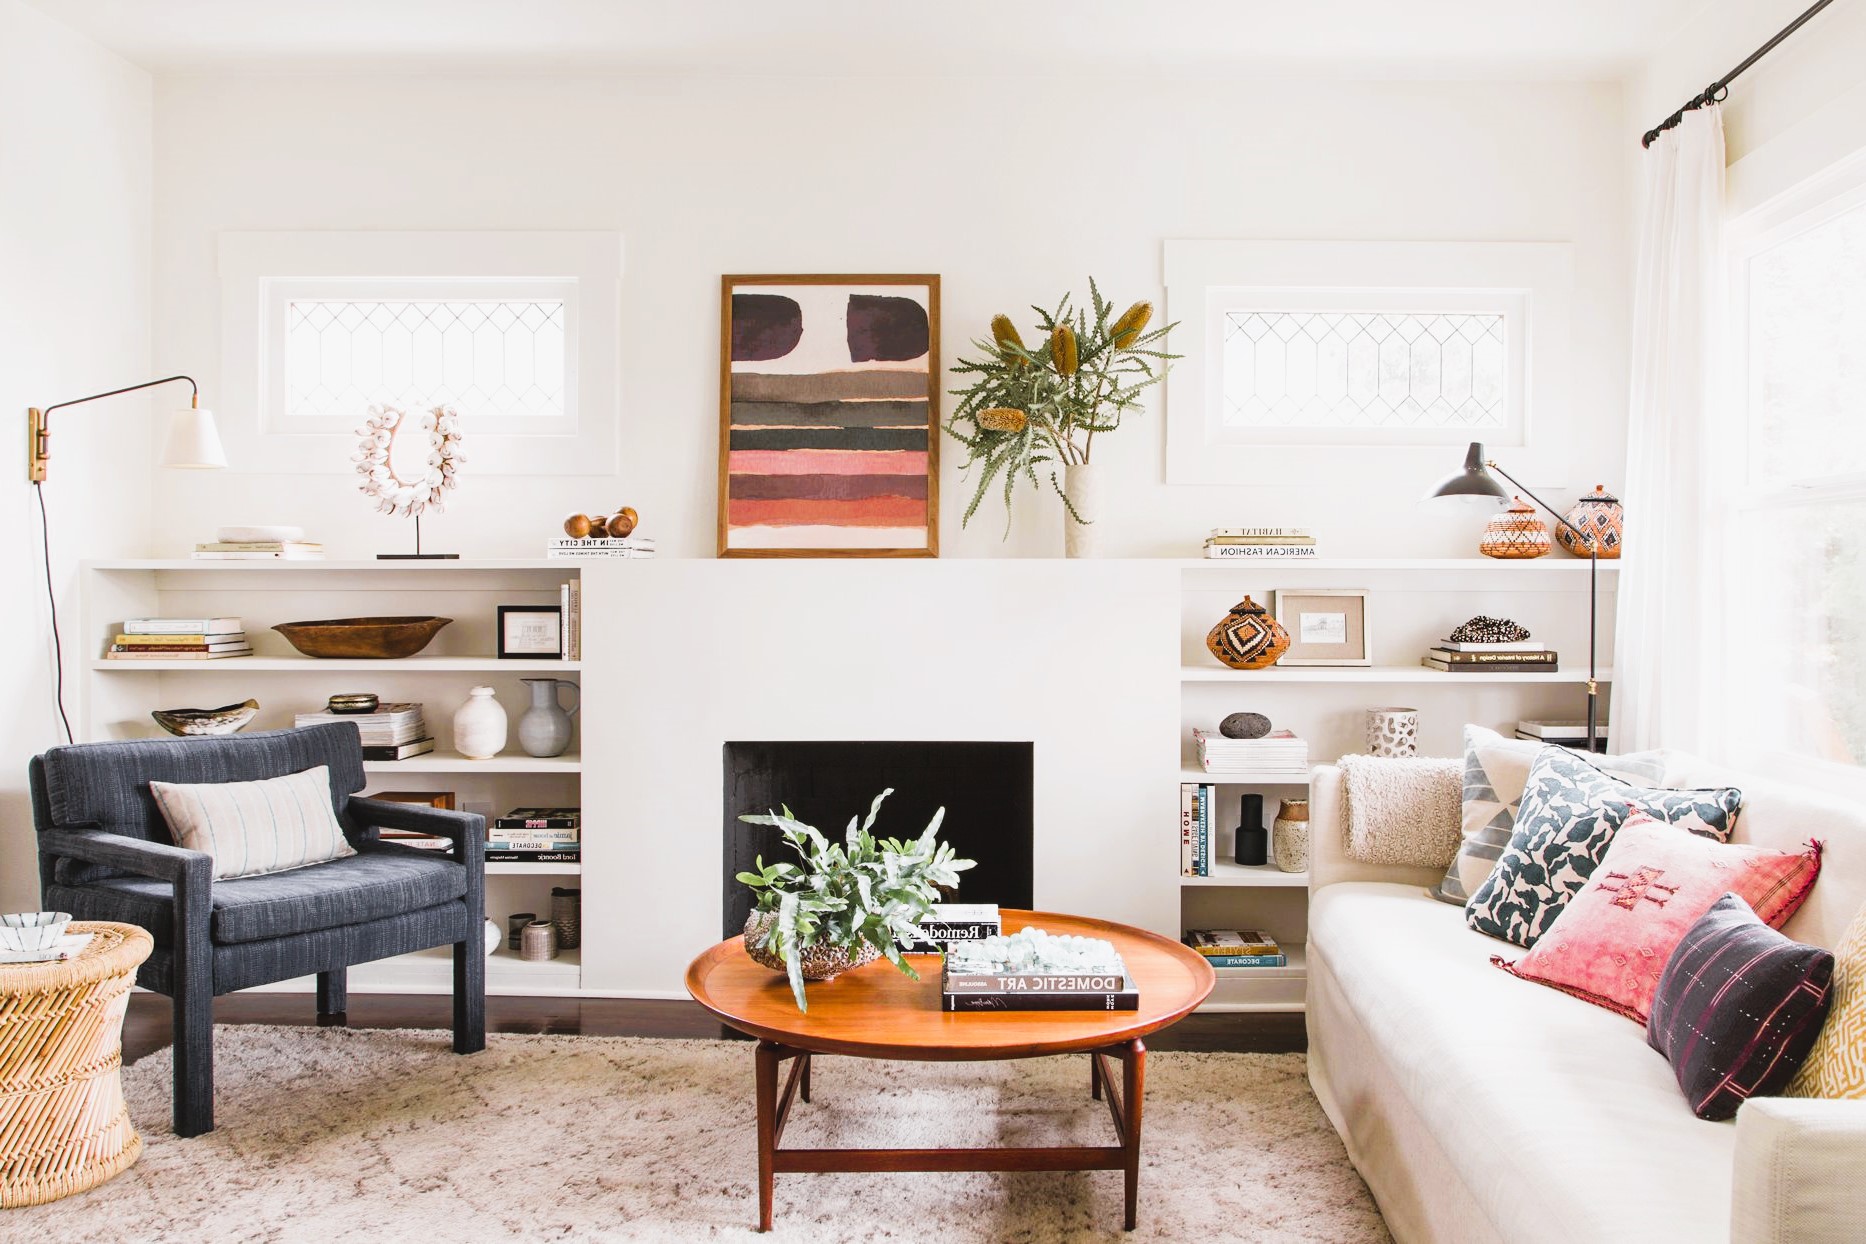 10 Creative Ways to Rearrange Furniture in Your Living Room